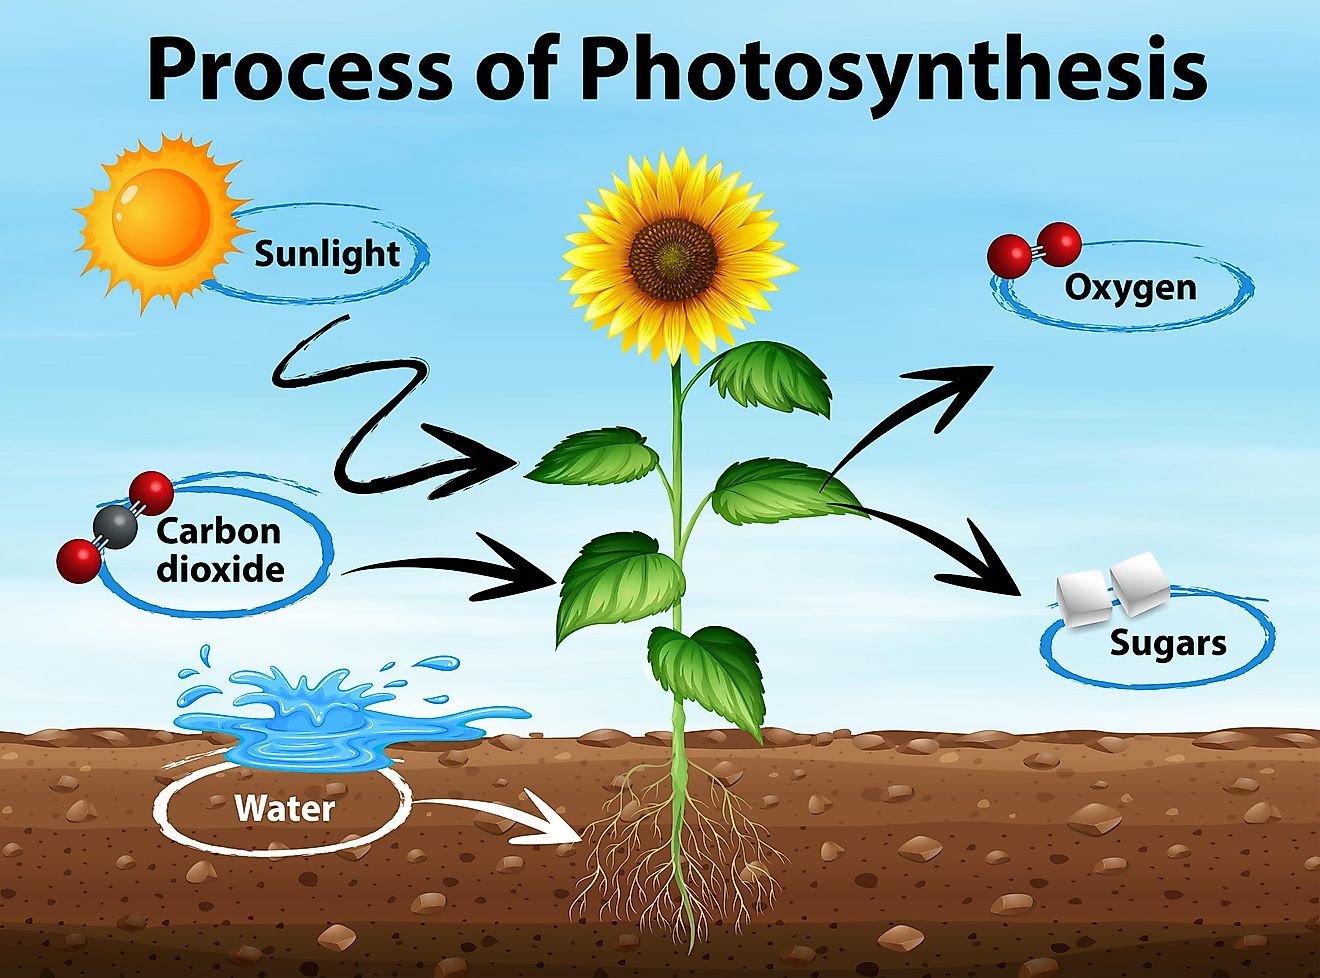 an essay on photosynthesis process